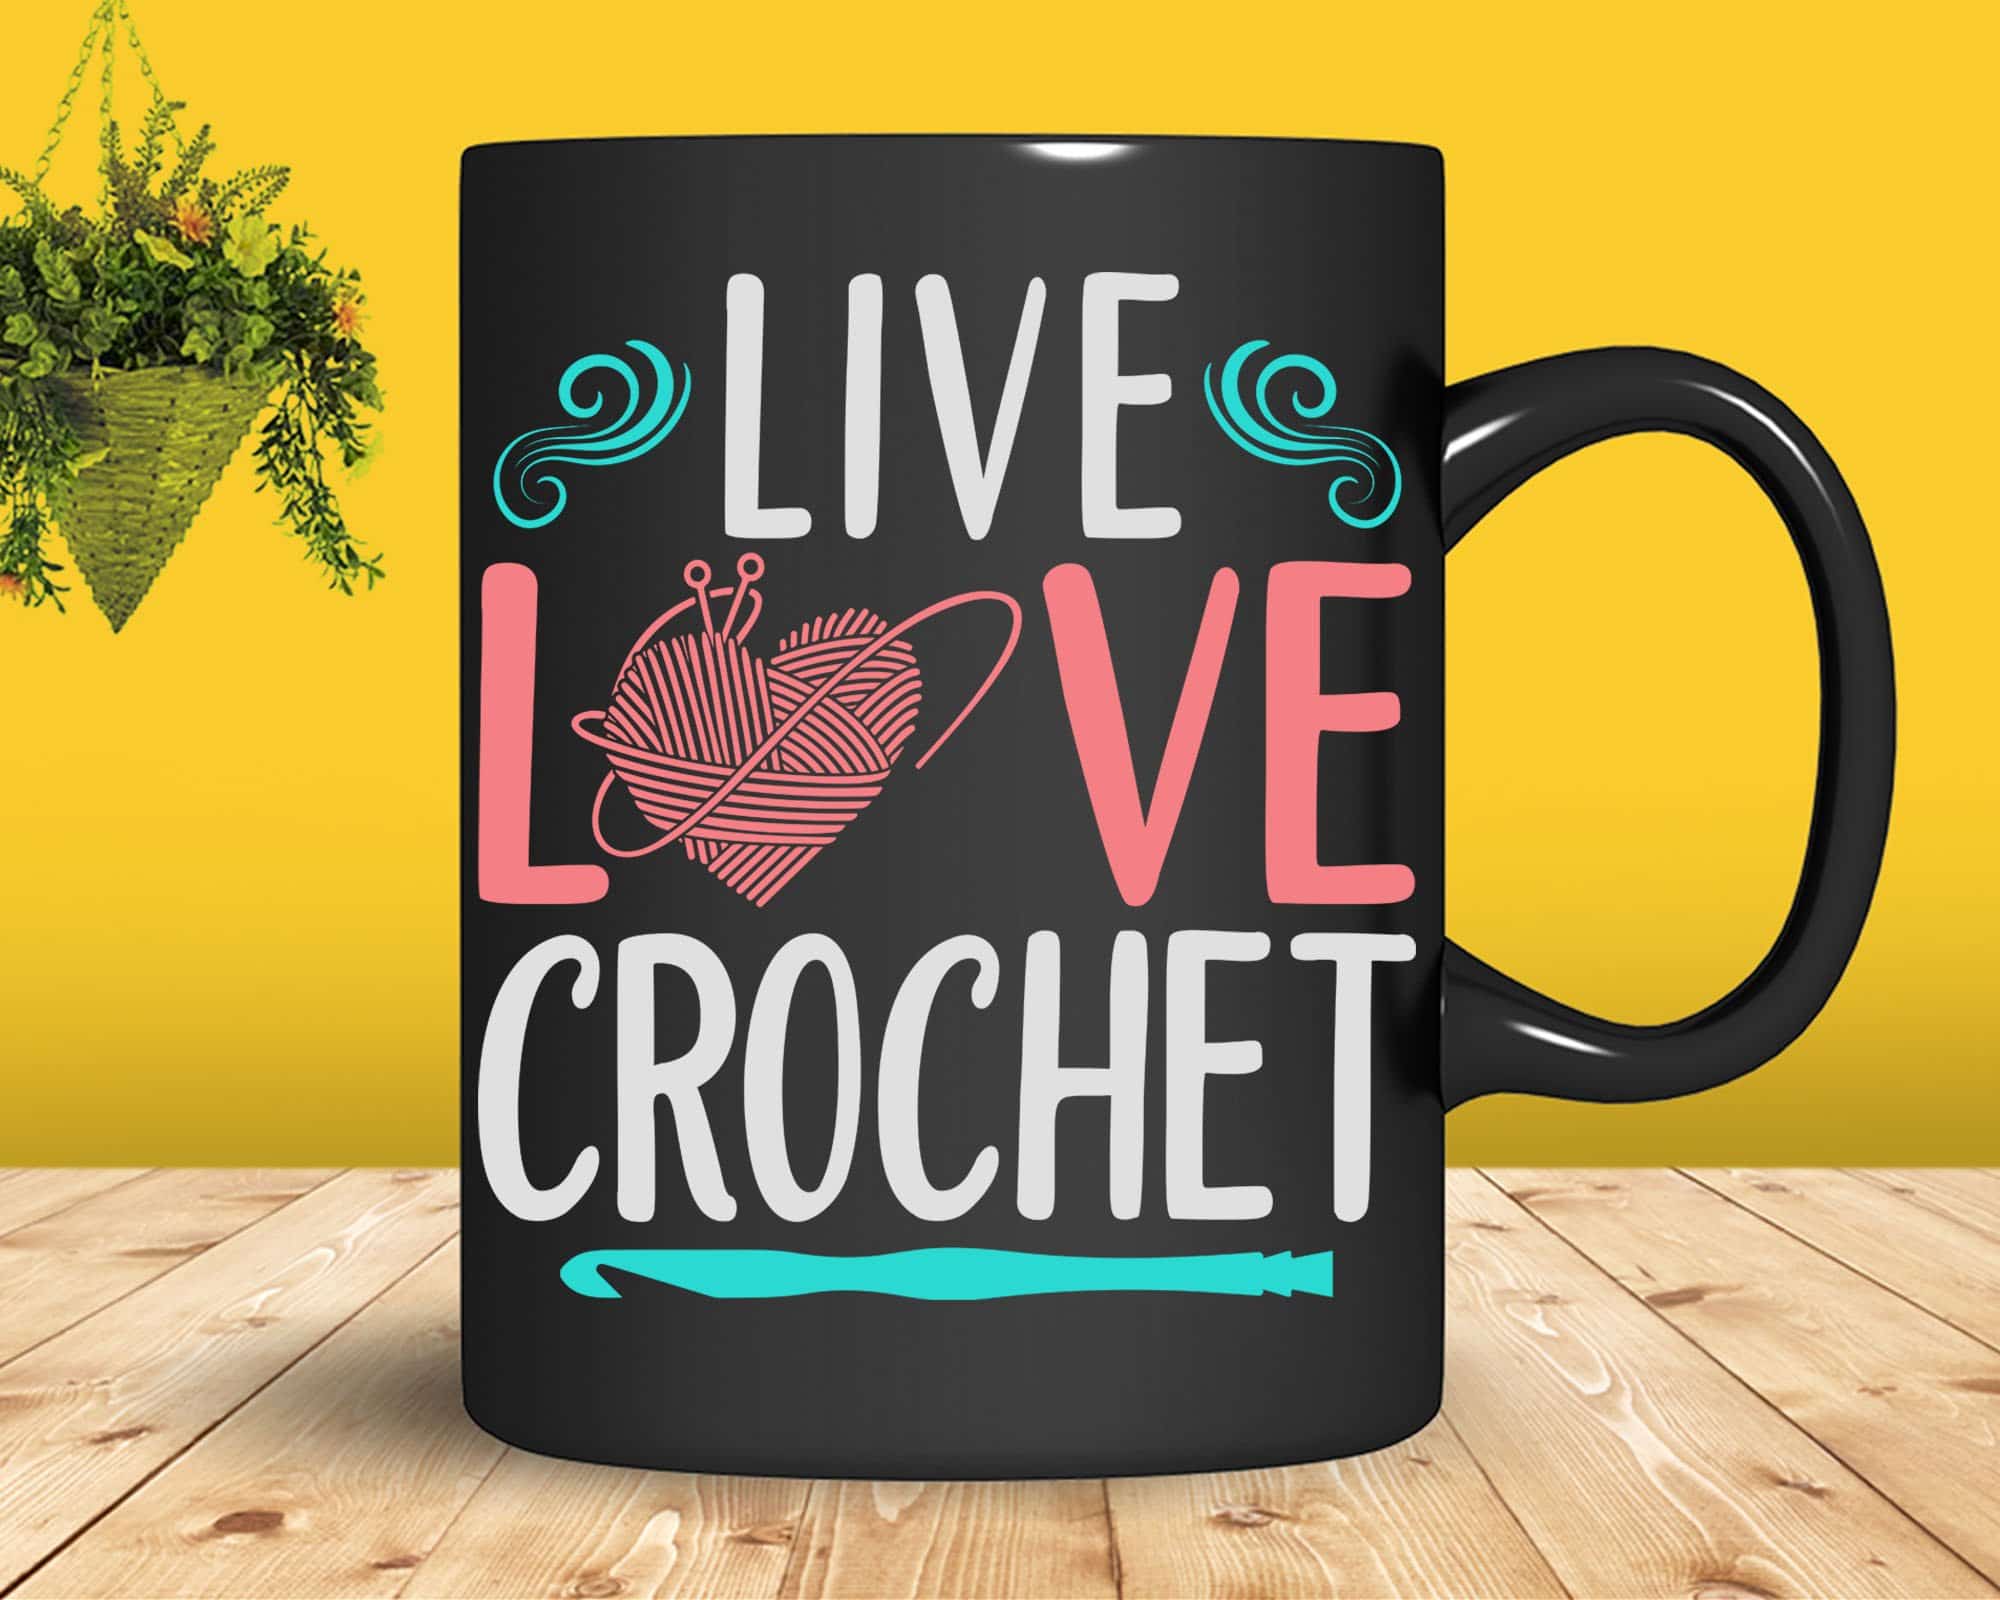 Made With Love Svg, Crochet Svg File for Cricut Yarn Svg Homemade Svg Made  With Love Tag Gift Tag Svg Commercial Use Digital File Made by Me 